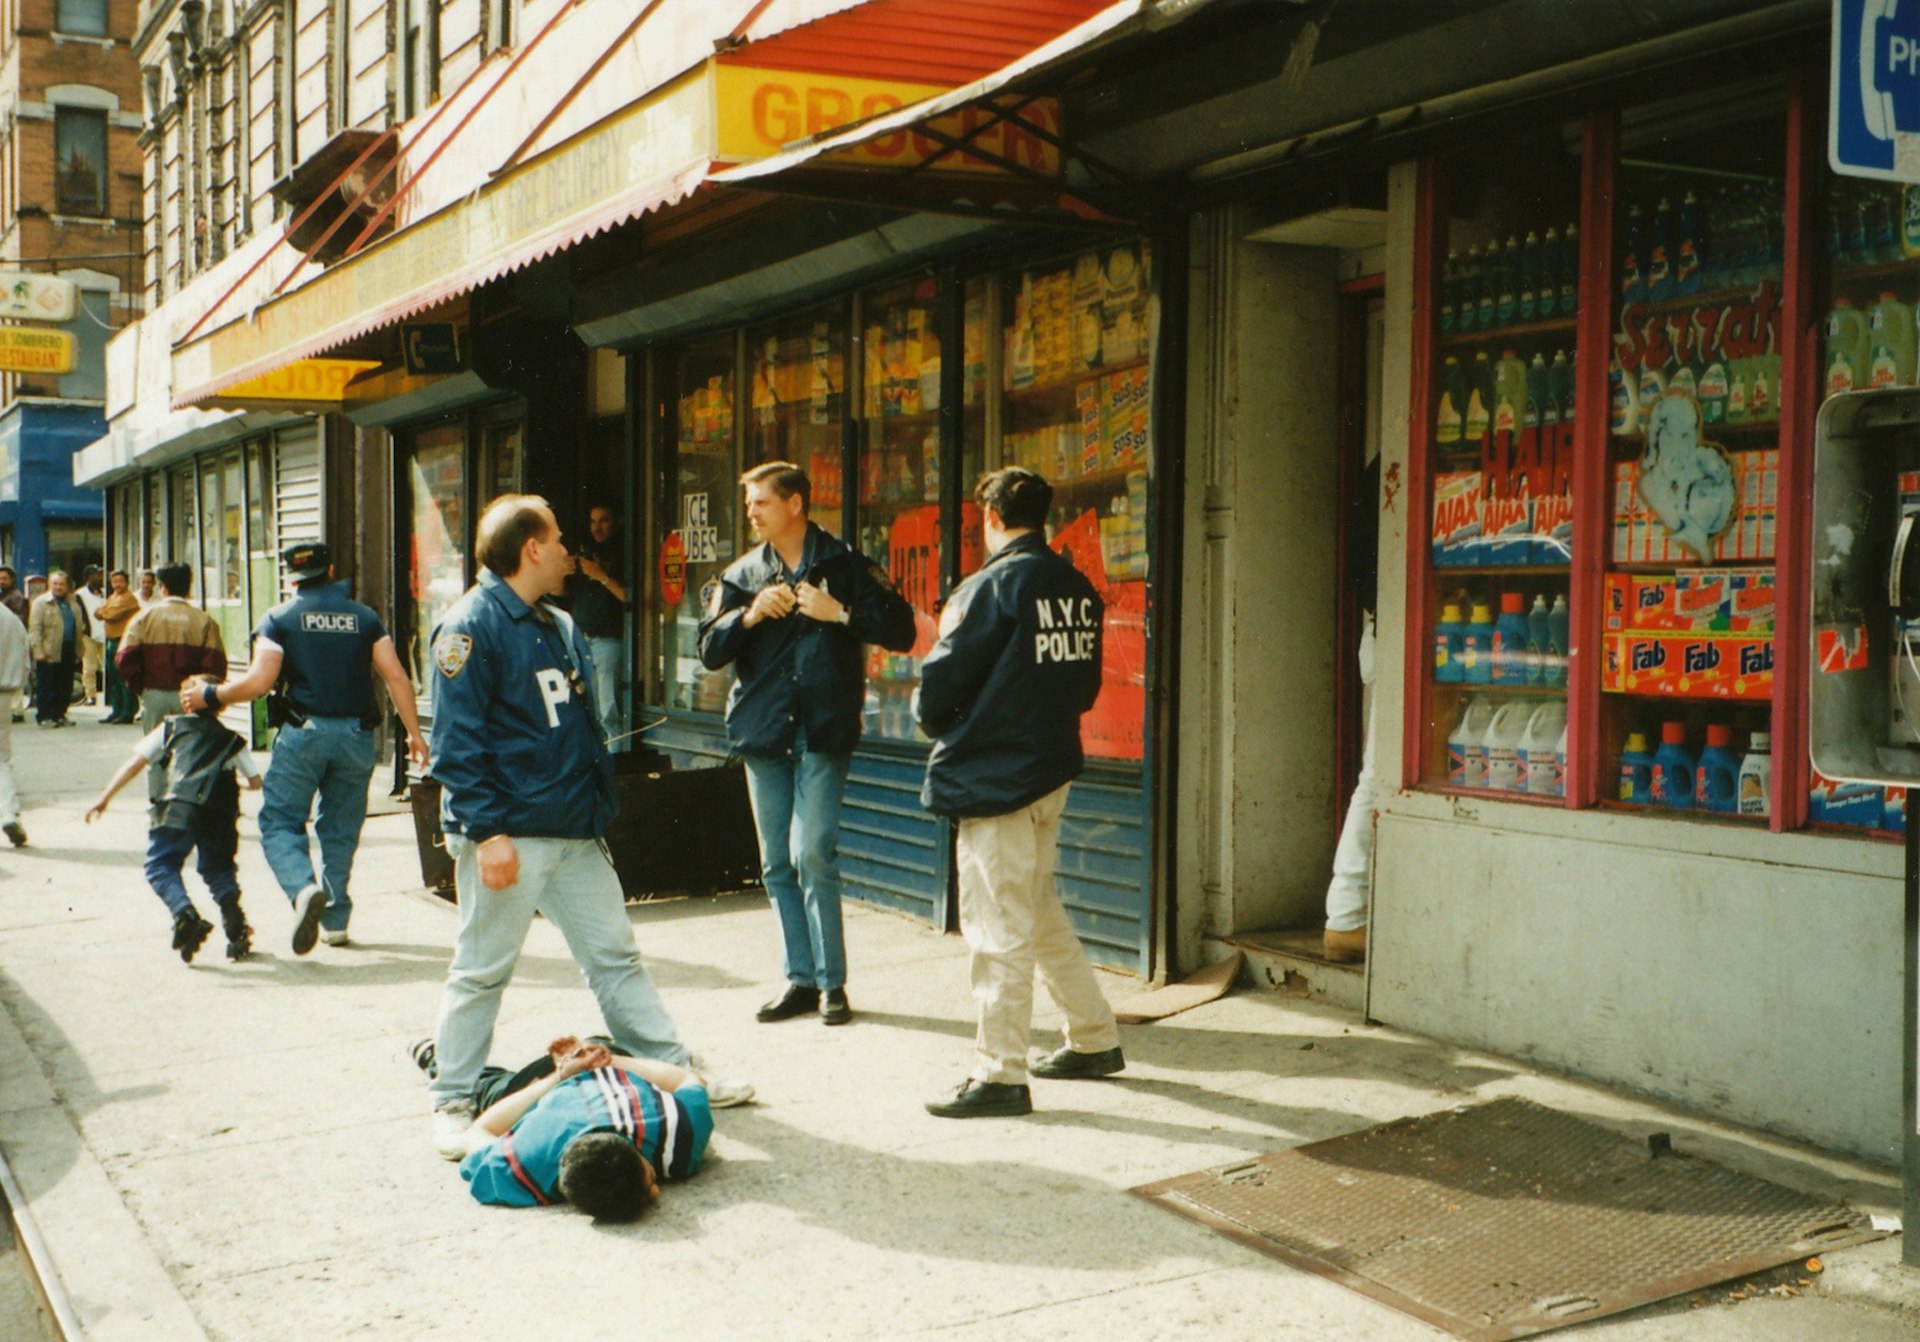 Drug arrest at 179 Essex street in 1995. Typical example of a neighbourhood grocery store whose main source of income was selling hard drugs. The Lower East Side was one of the most economically profitable and open public drug markets in America and probably the world. Drugs were sold openly all over the minority section of the community.